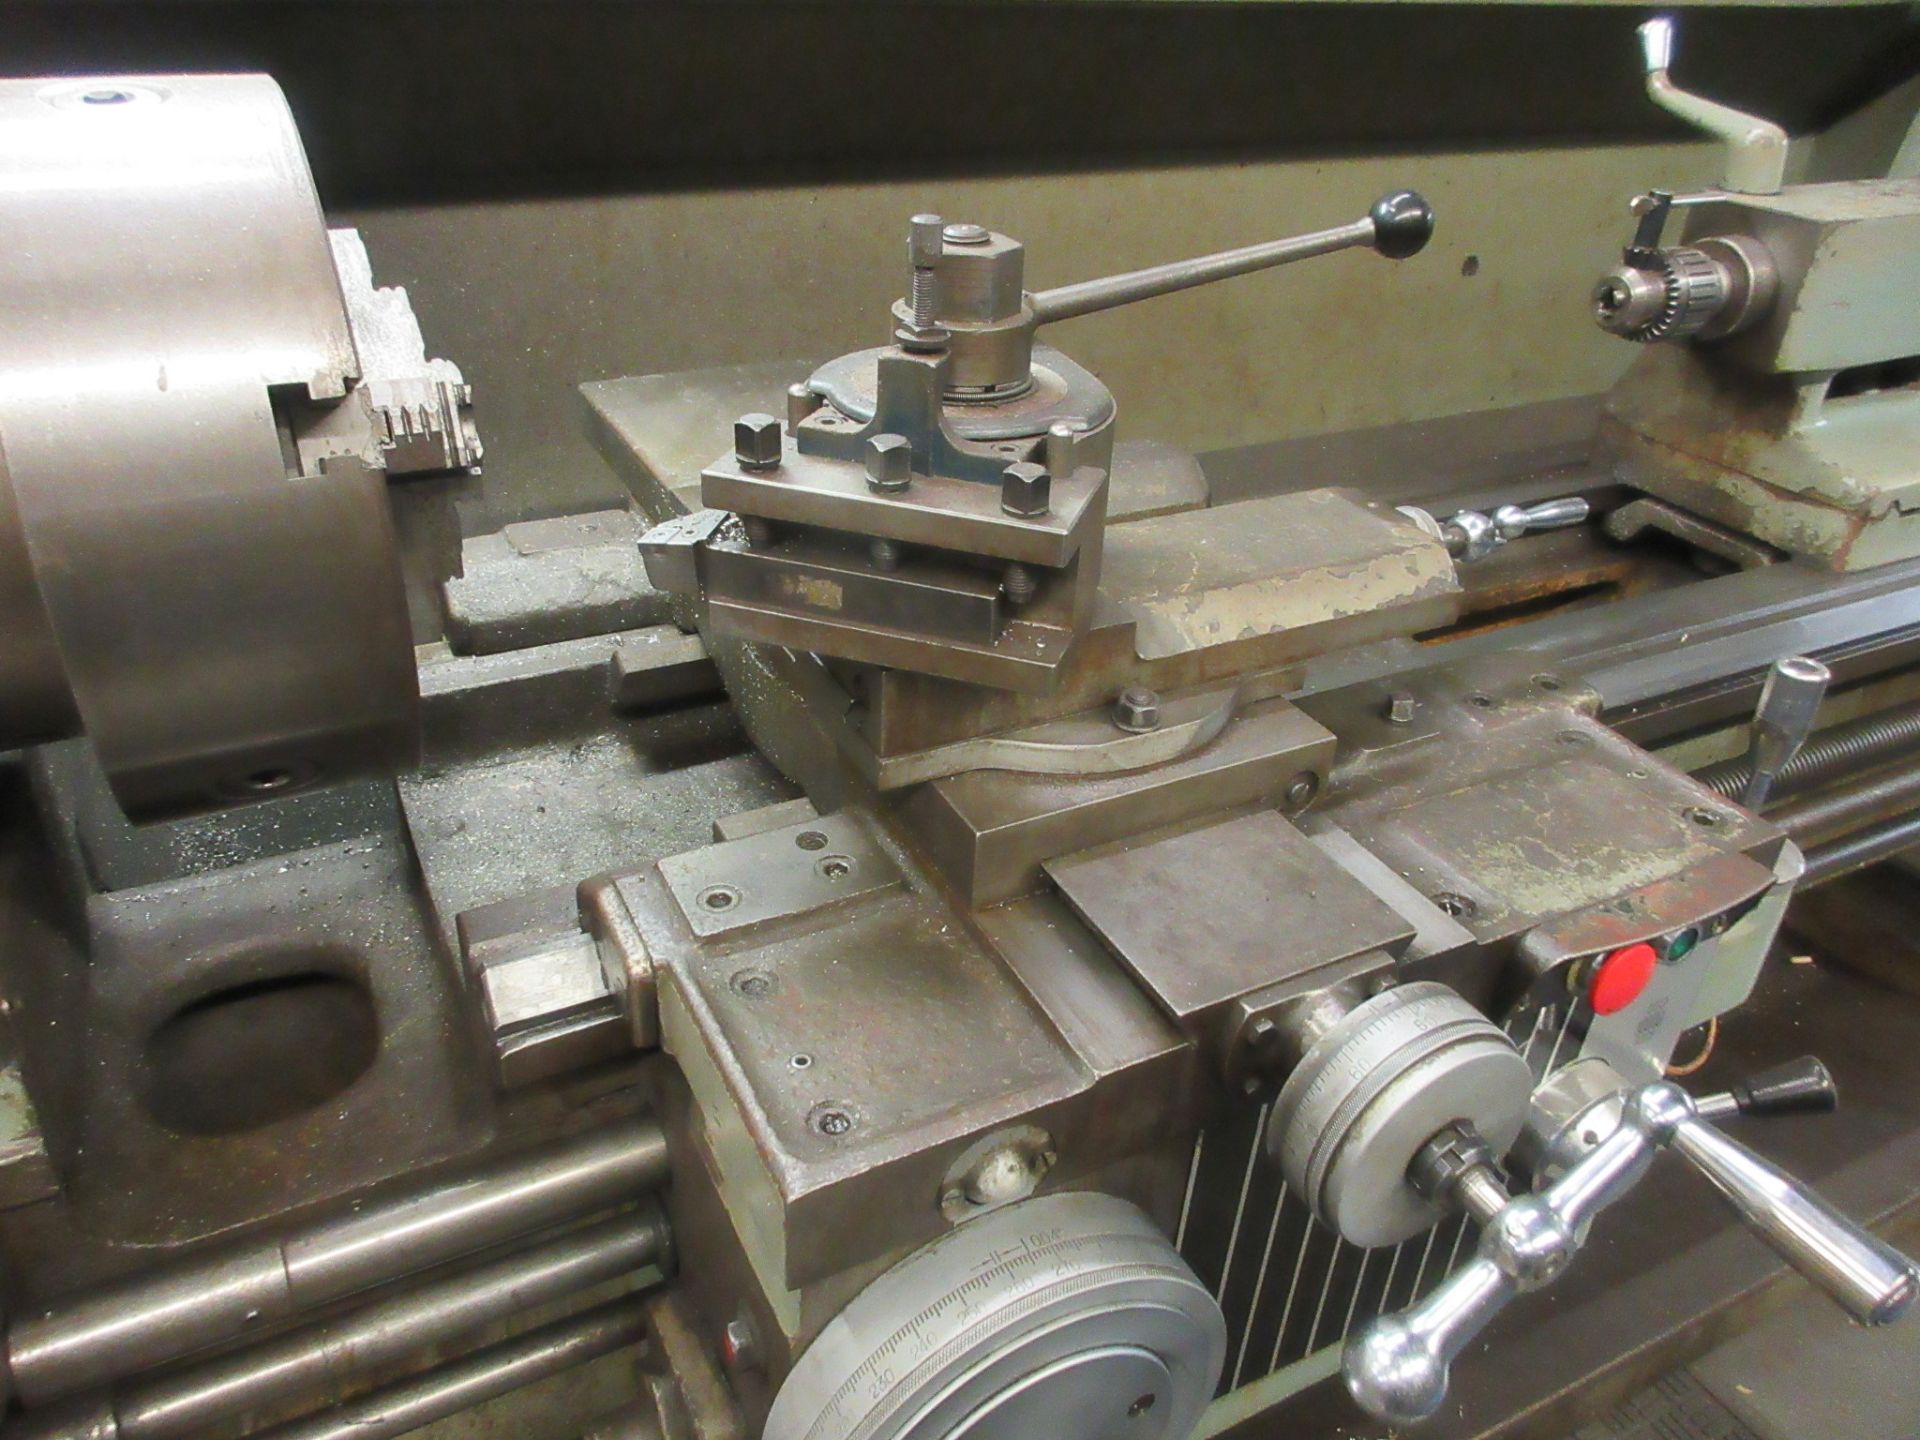 GWM S1 LATHE, 12” 3-JAW CHUCK, 20” SWING, 80” BED, 65” BETWEEN CENTERS, TAILSTOCK, TOOL POST, SPEEDS - Image 10 of 17